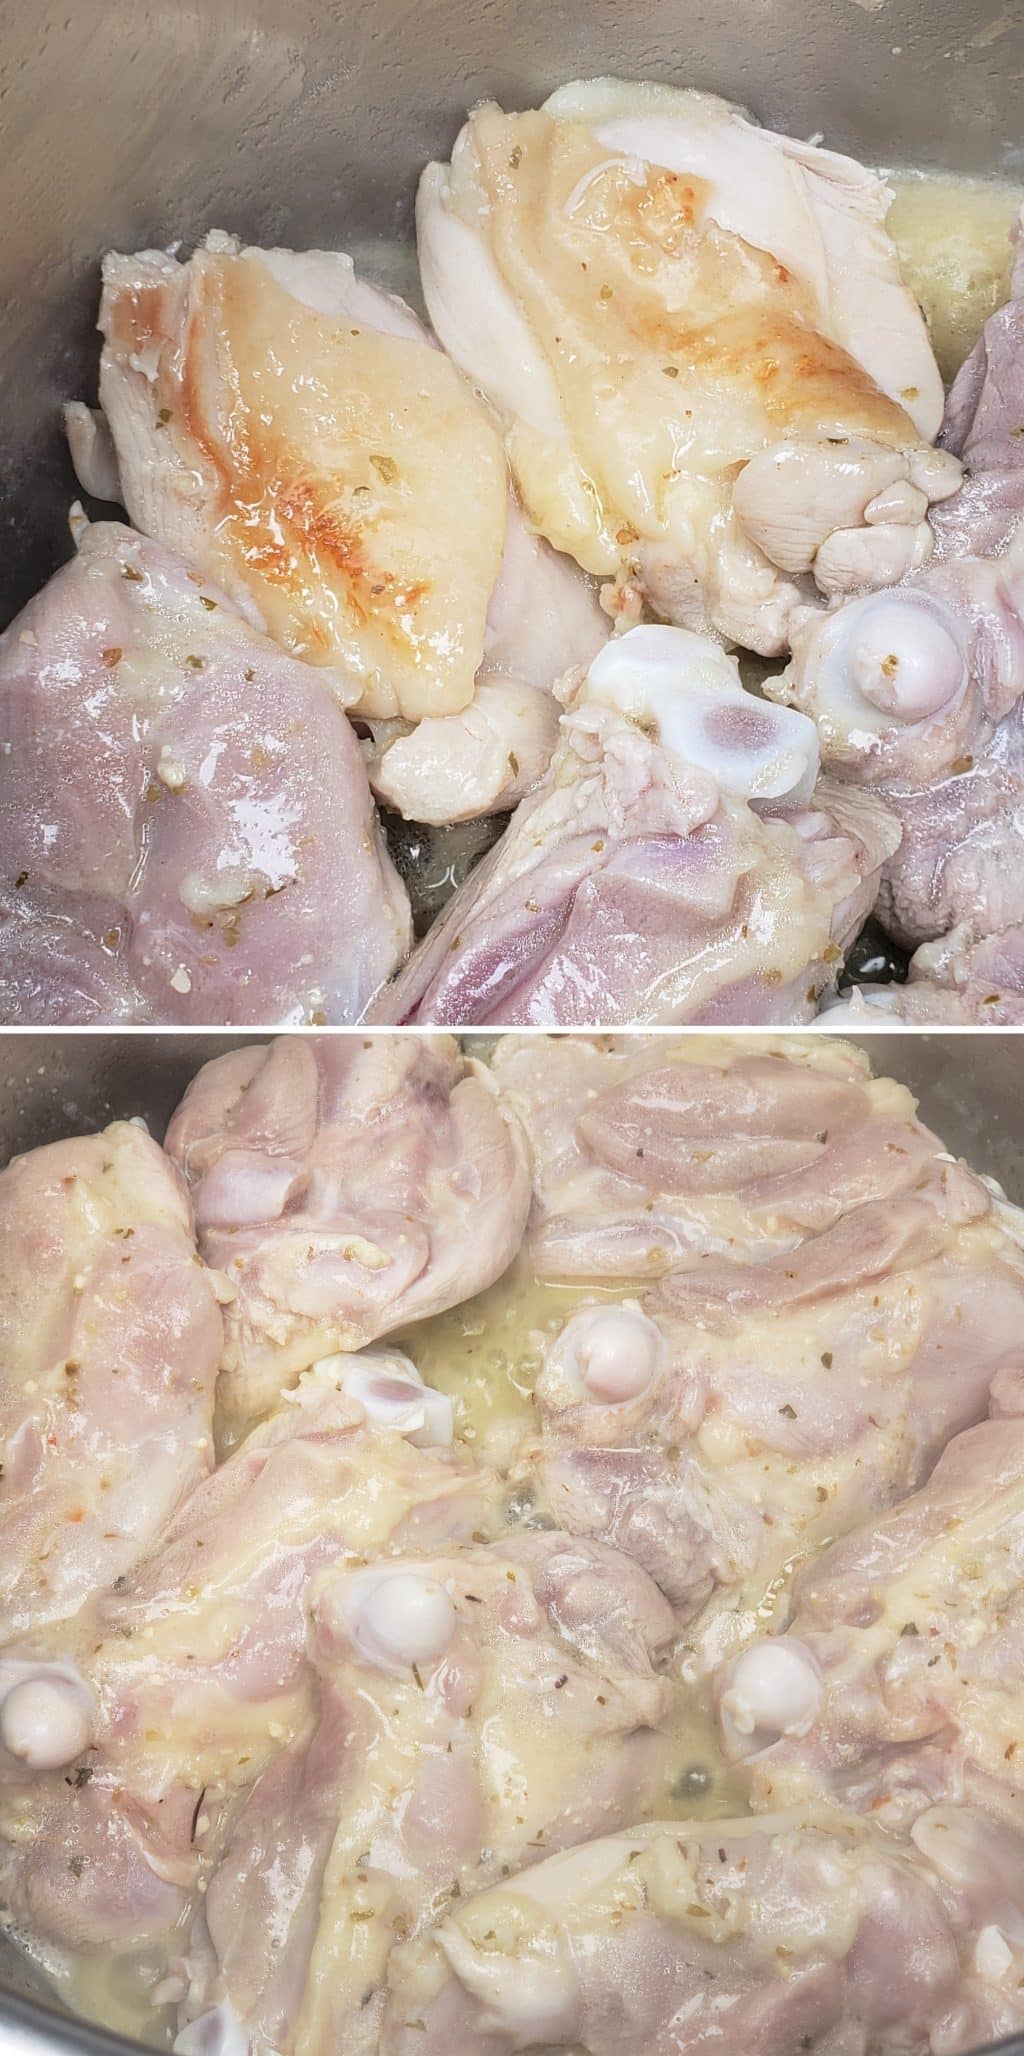 Dump in Chicken and Dressing or Sear Skin First